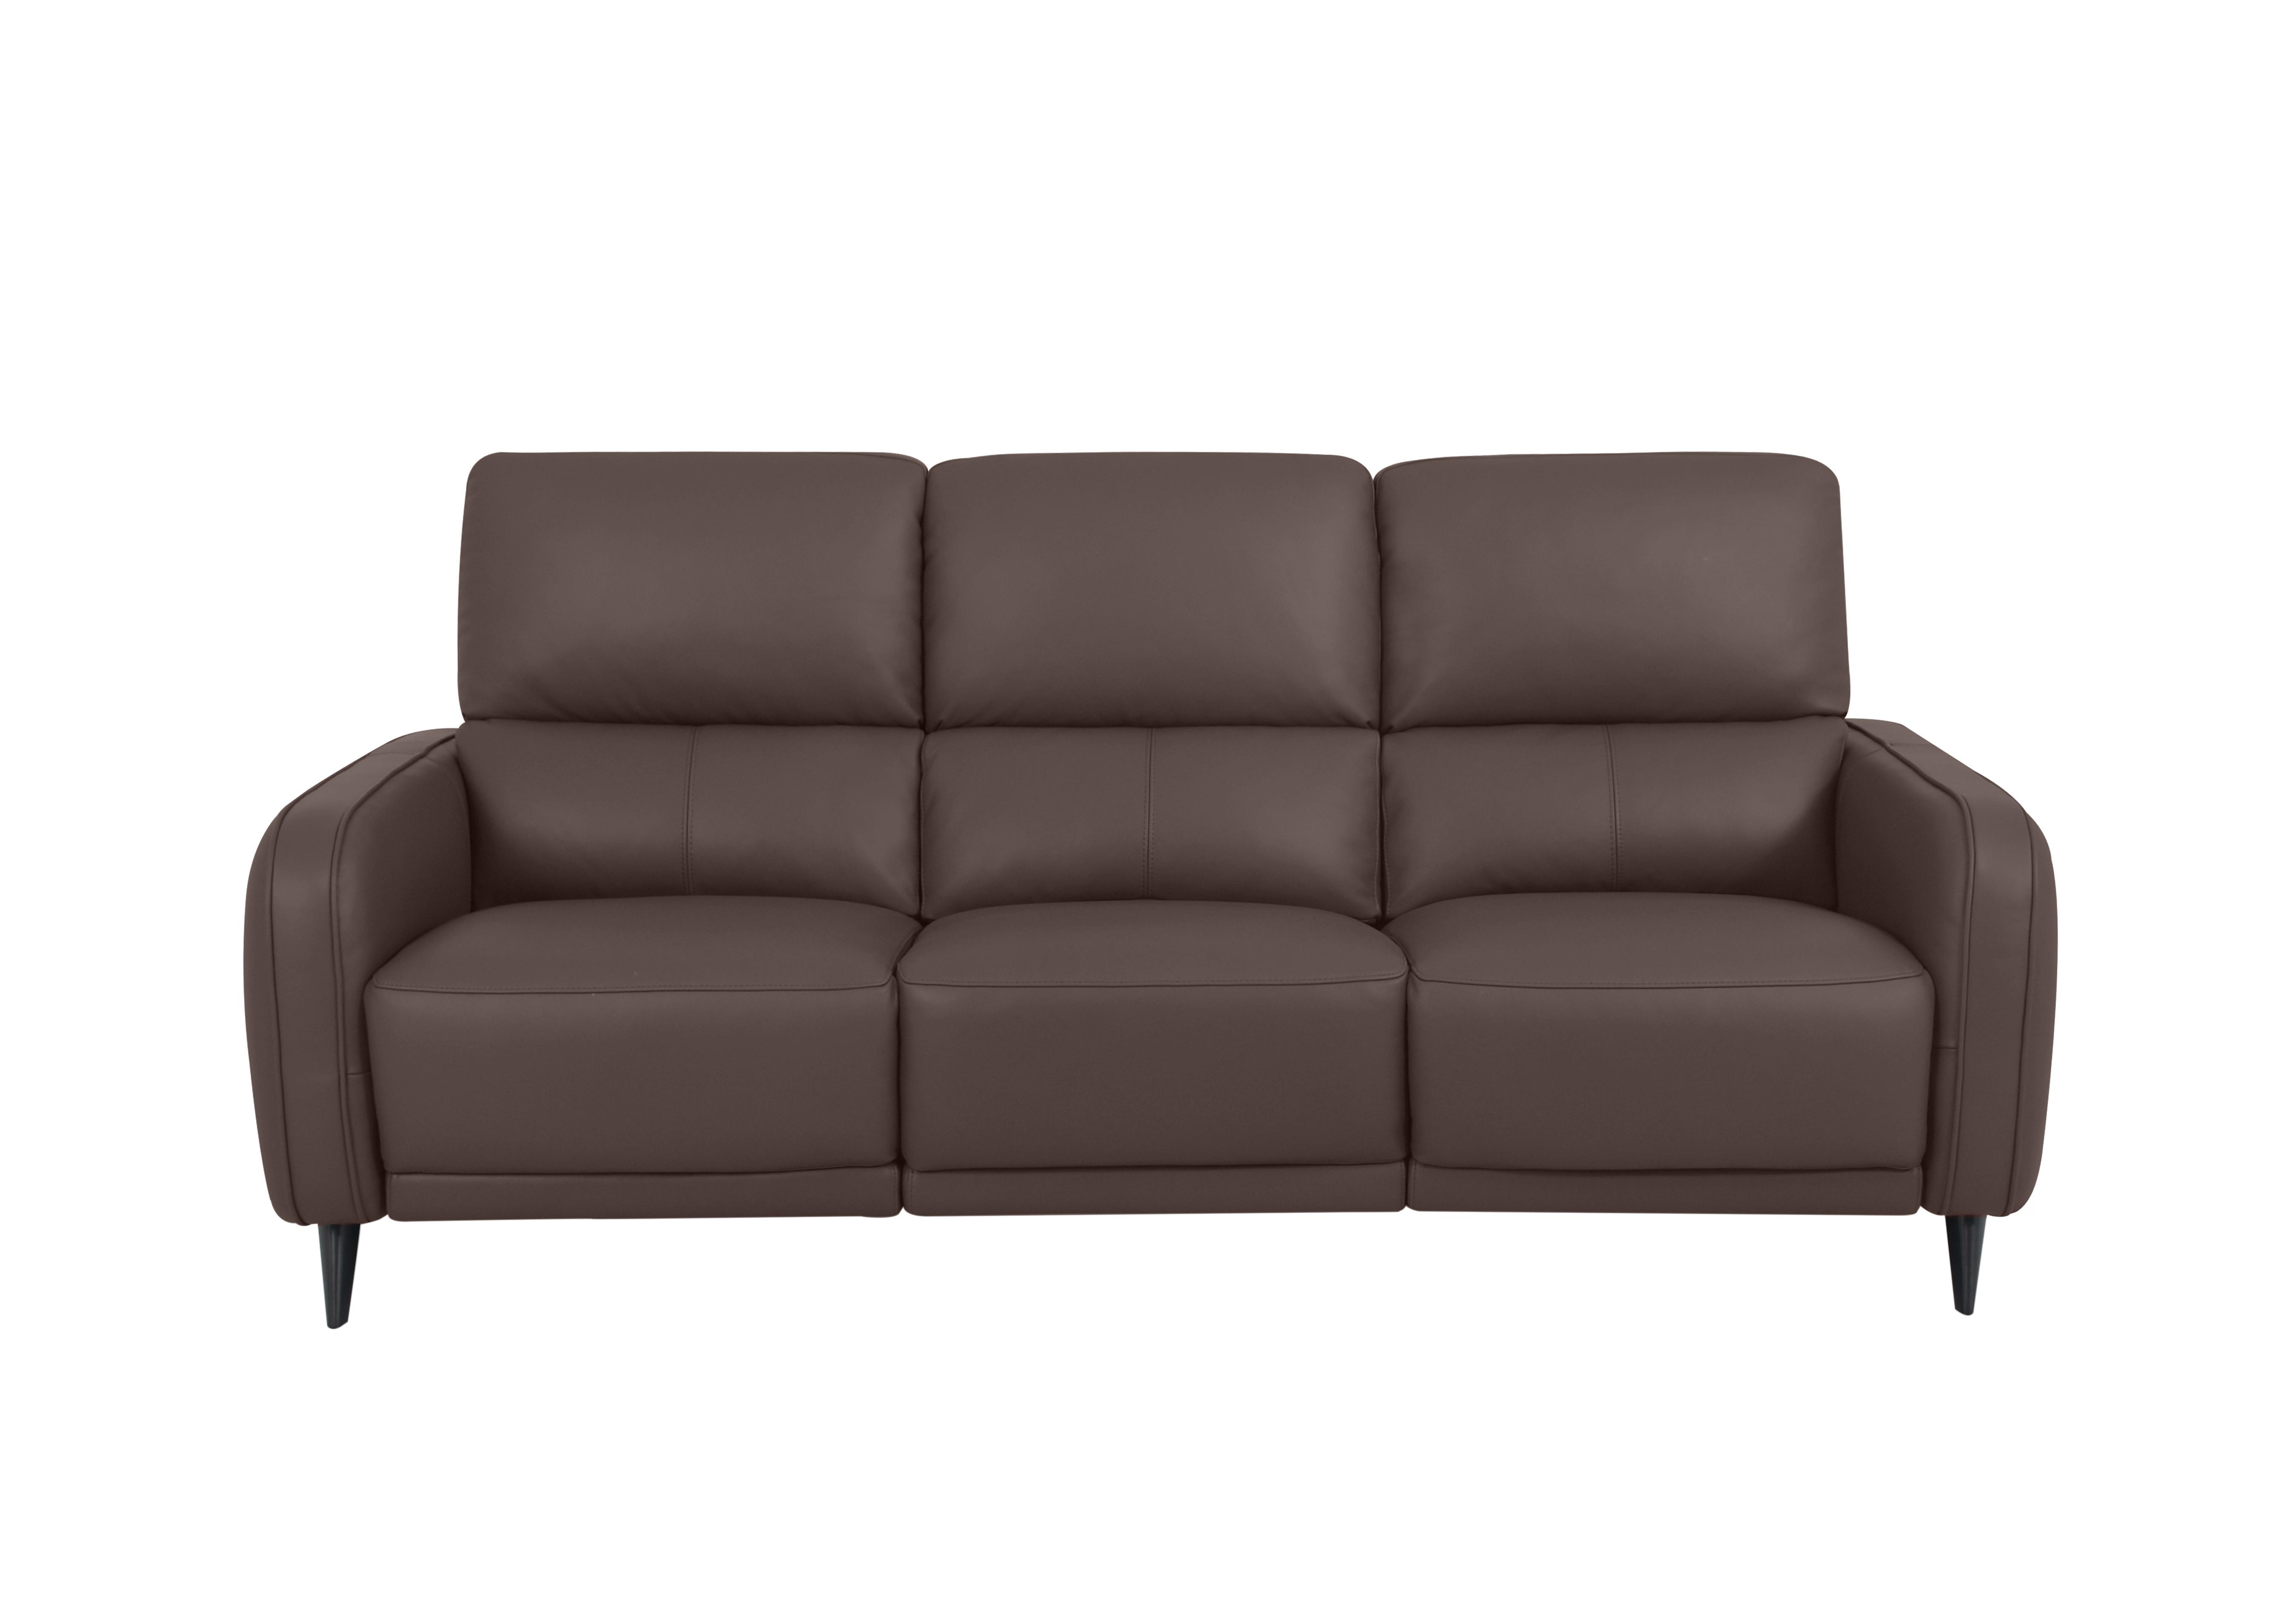 Logan 3 Seater Leather Sofa in Nn-512e Cacao Brown on Furniture Village